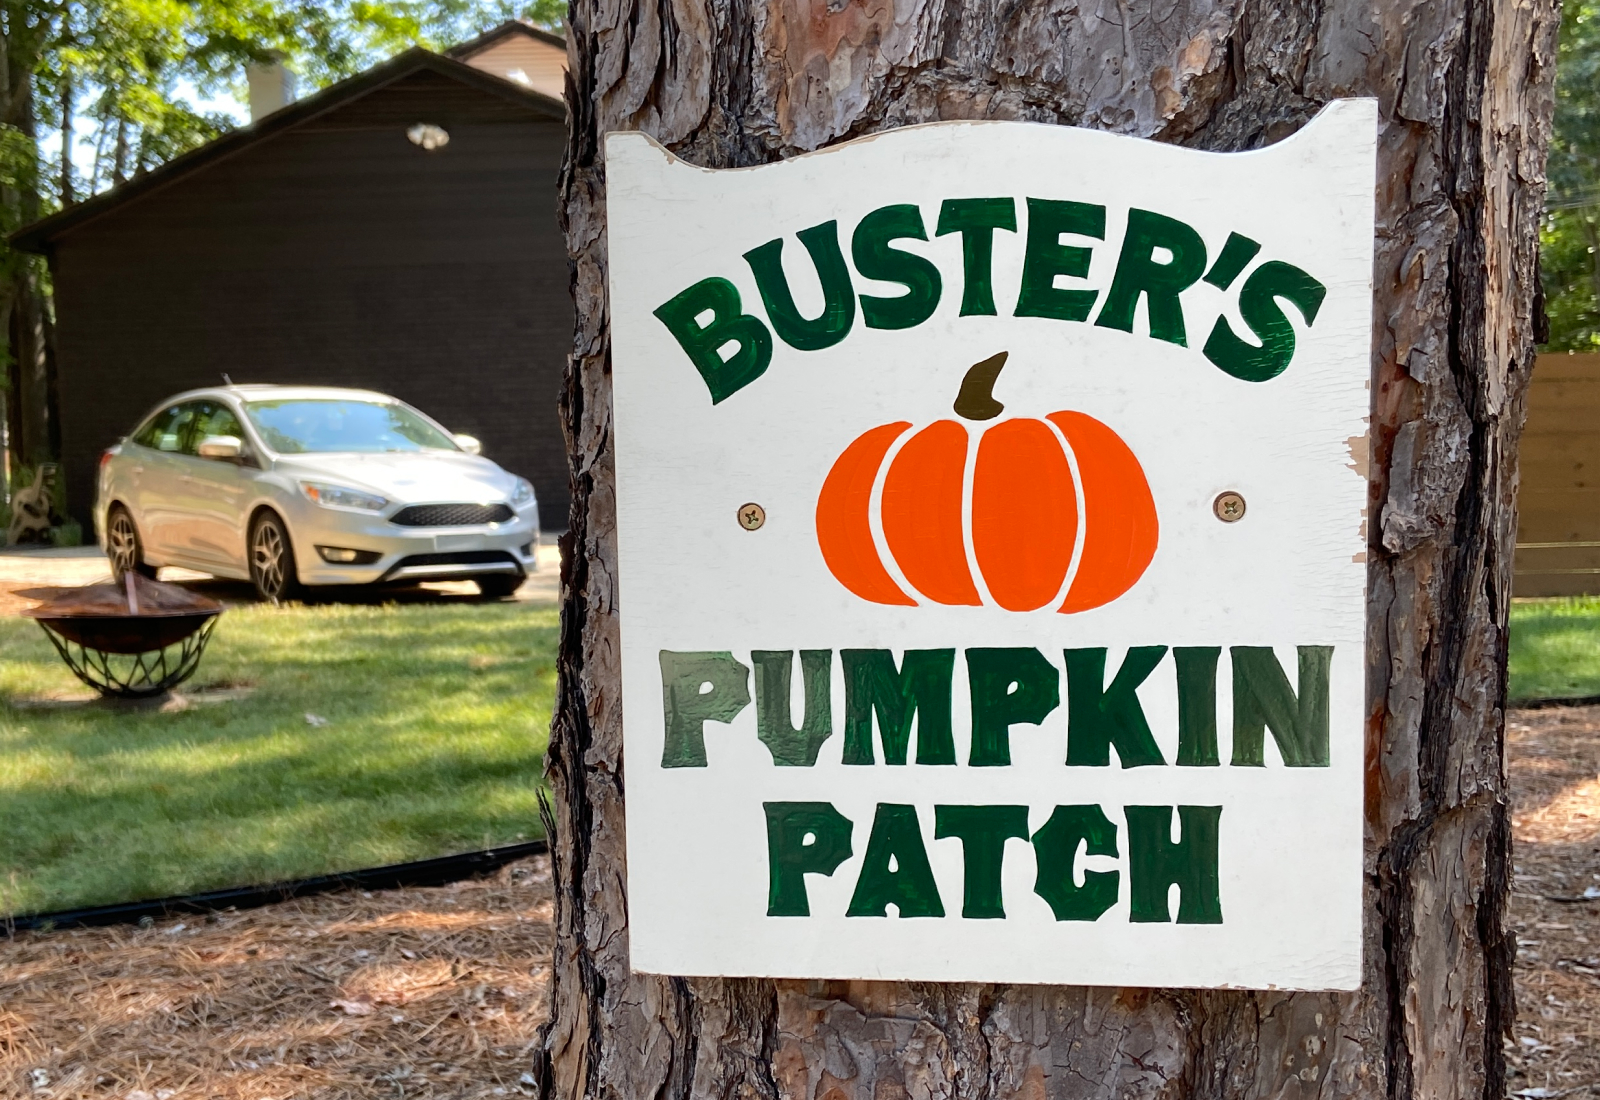 Buster's Pumpkin Patch | Hand Painted Sign by Joey Carty